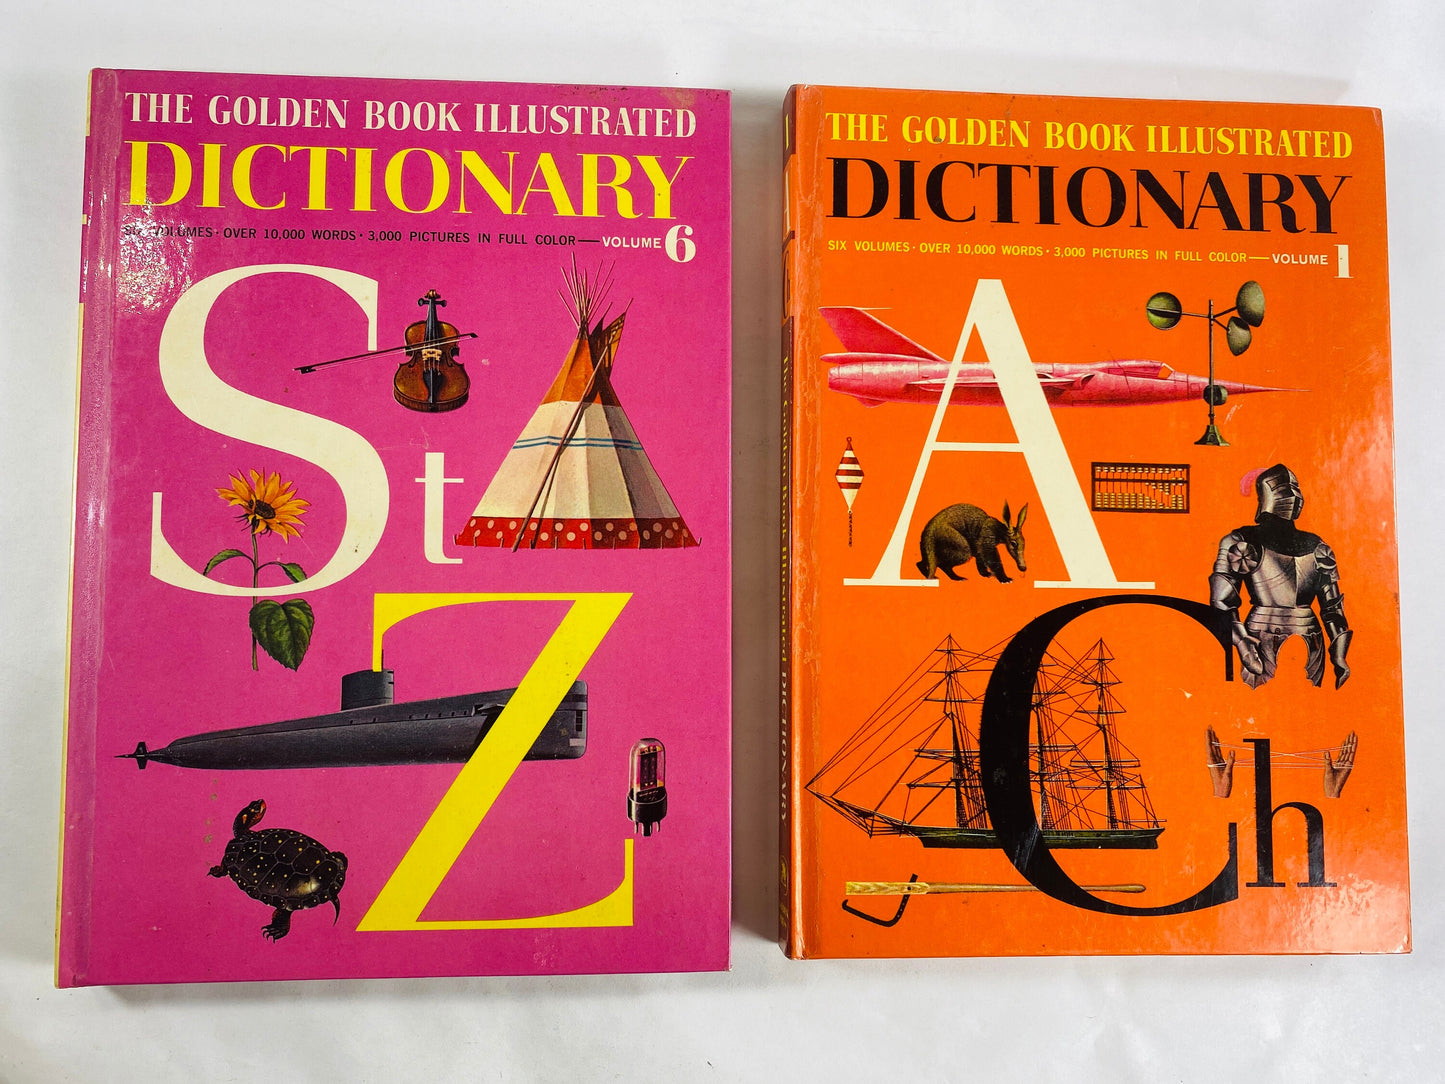 Golden Book Dictionary circa 1961 EARLY printing Vintage book volumes 1 or 6 Mary Reed LARGE oversized children's book